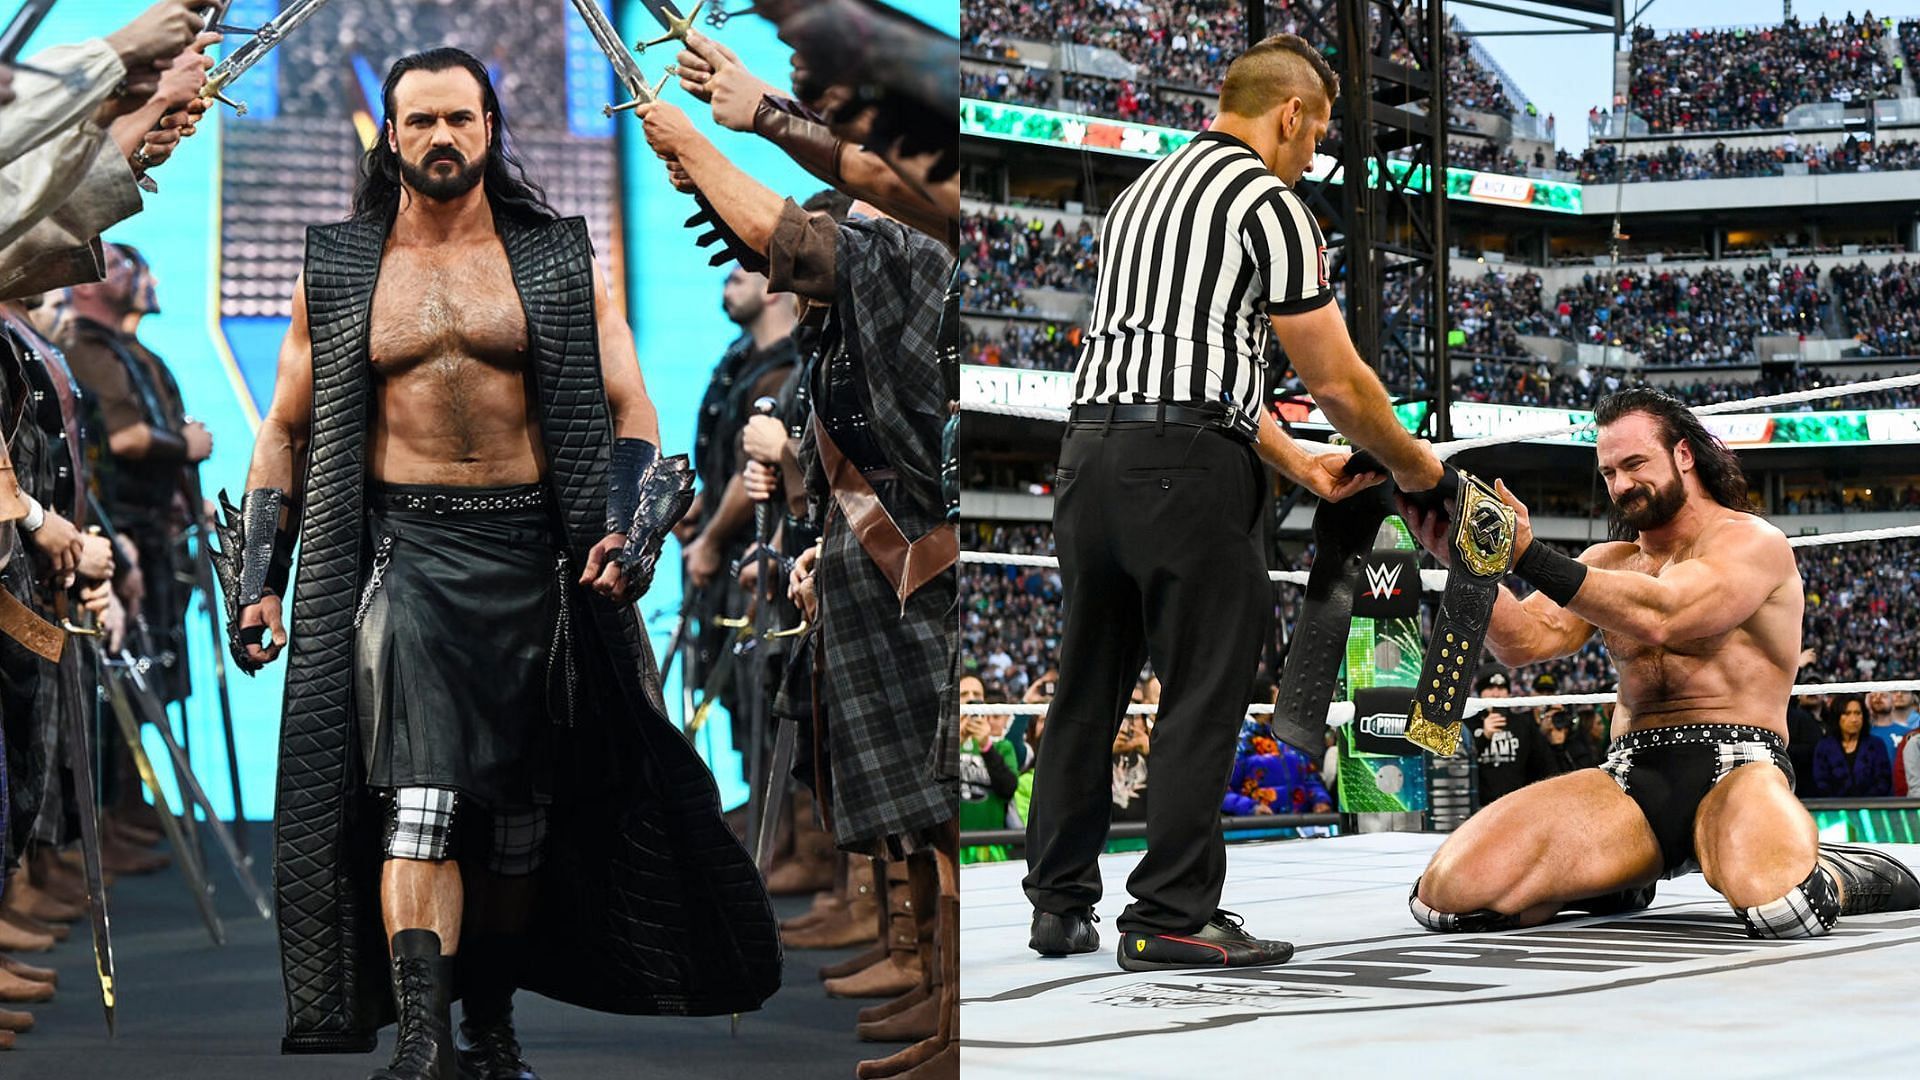 What is next for Drew McIntyre in WWE?